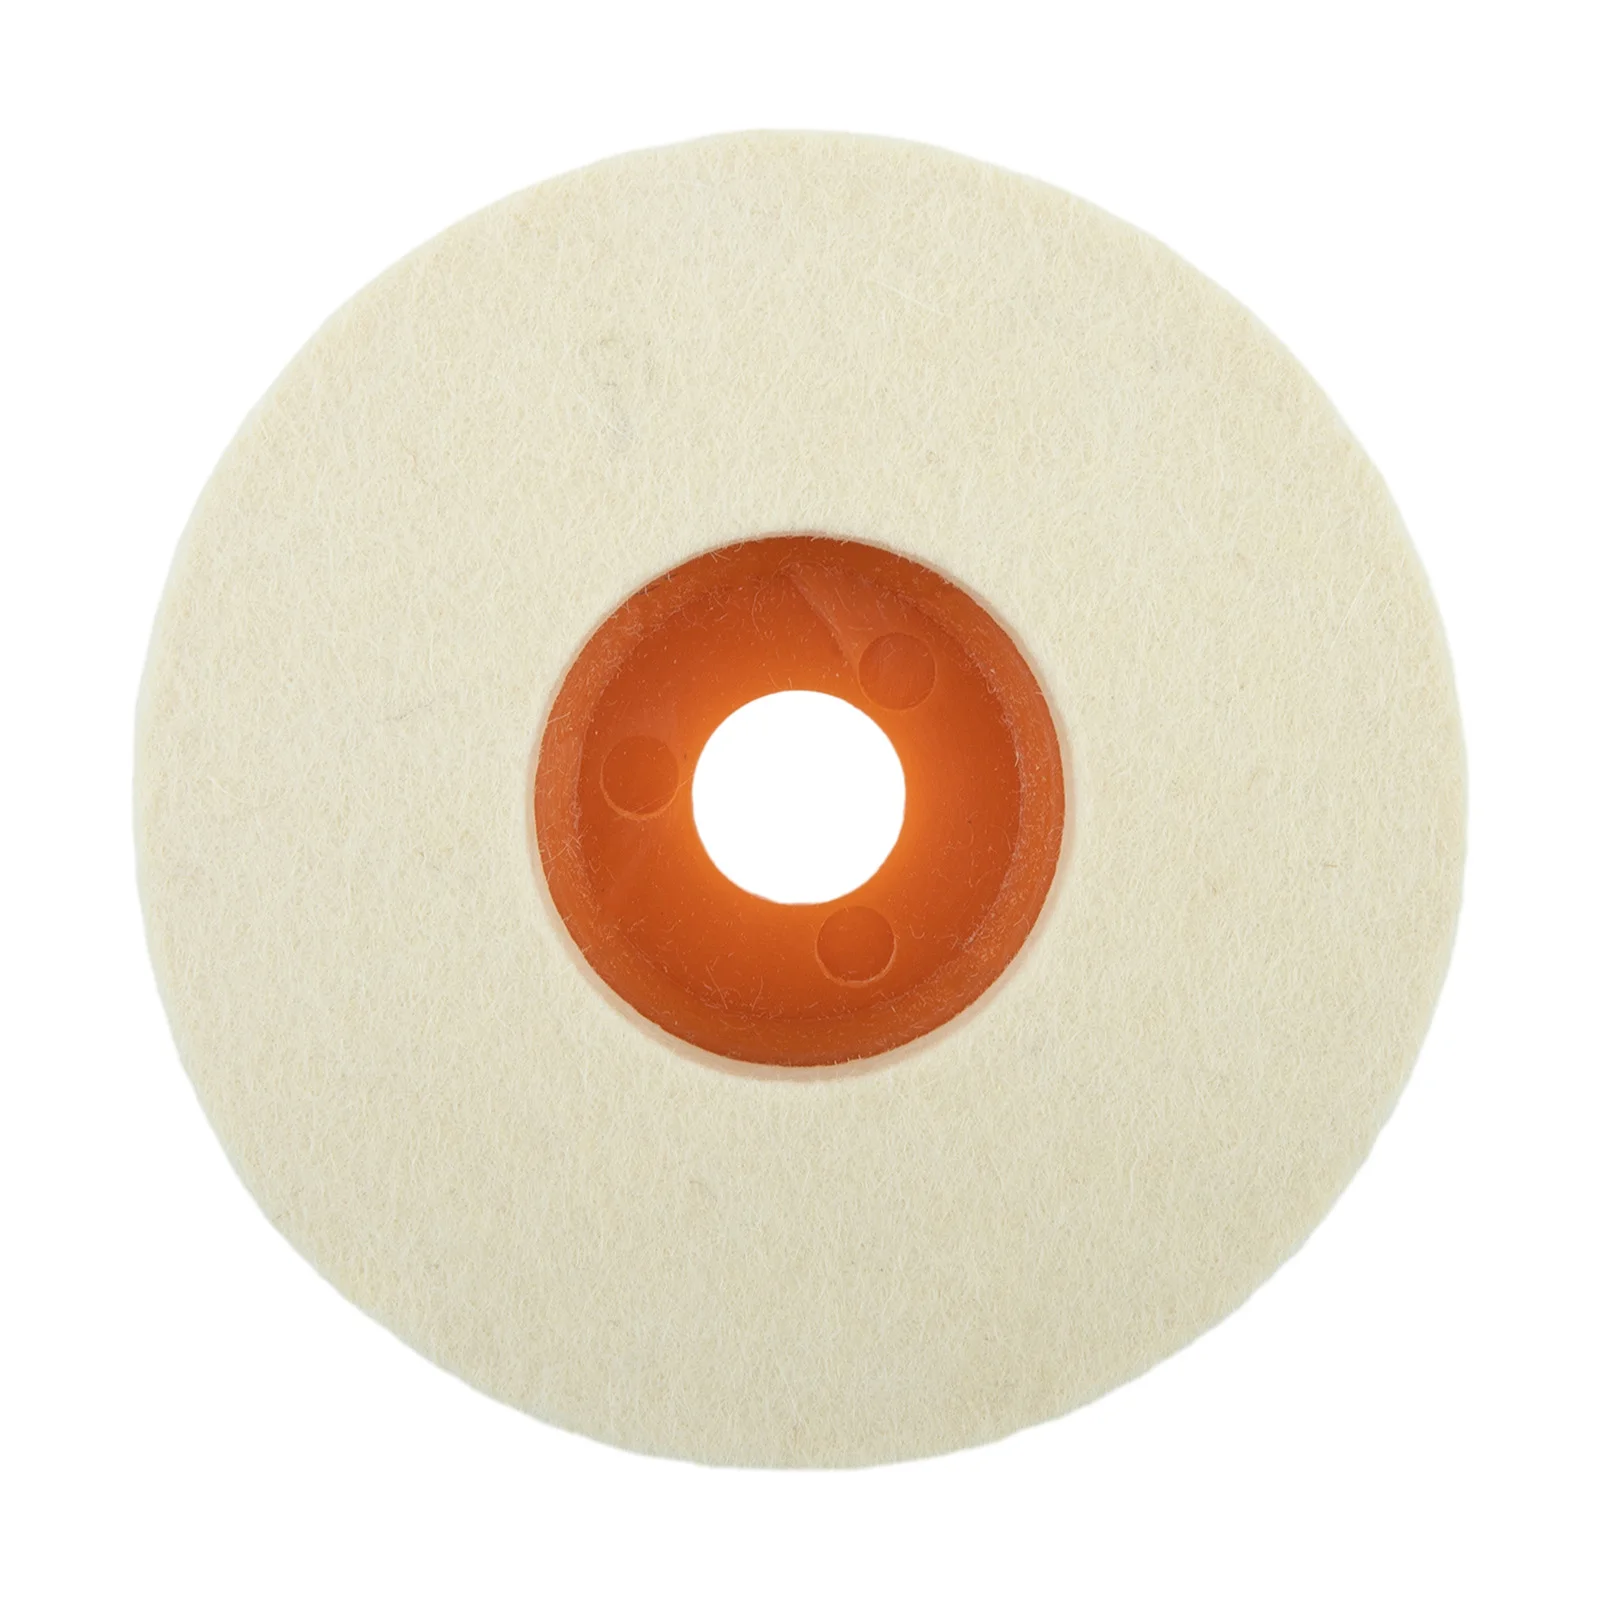 

4x Wool Polishing Wheel Felt Wool Buffing Polishers Pad Buffer Disc Spare Parts For Grinding Stainless Copper Aluminum Furniture